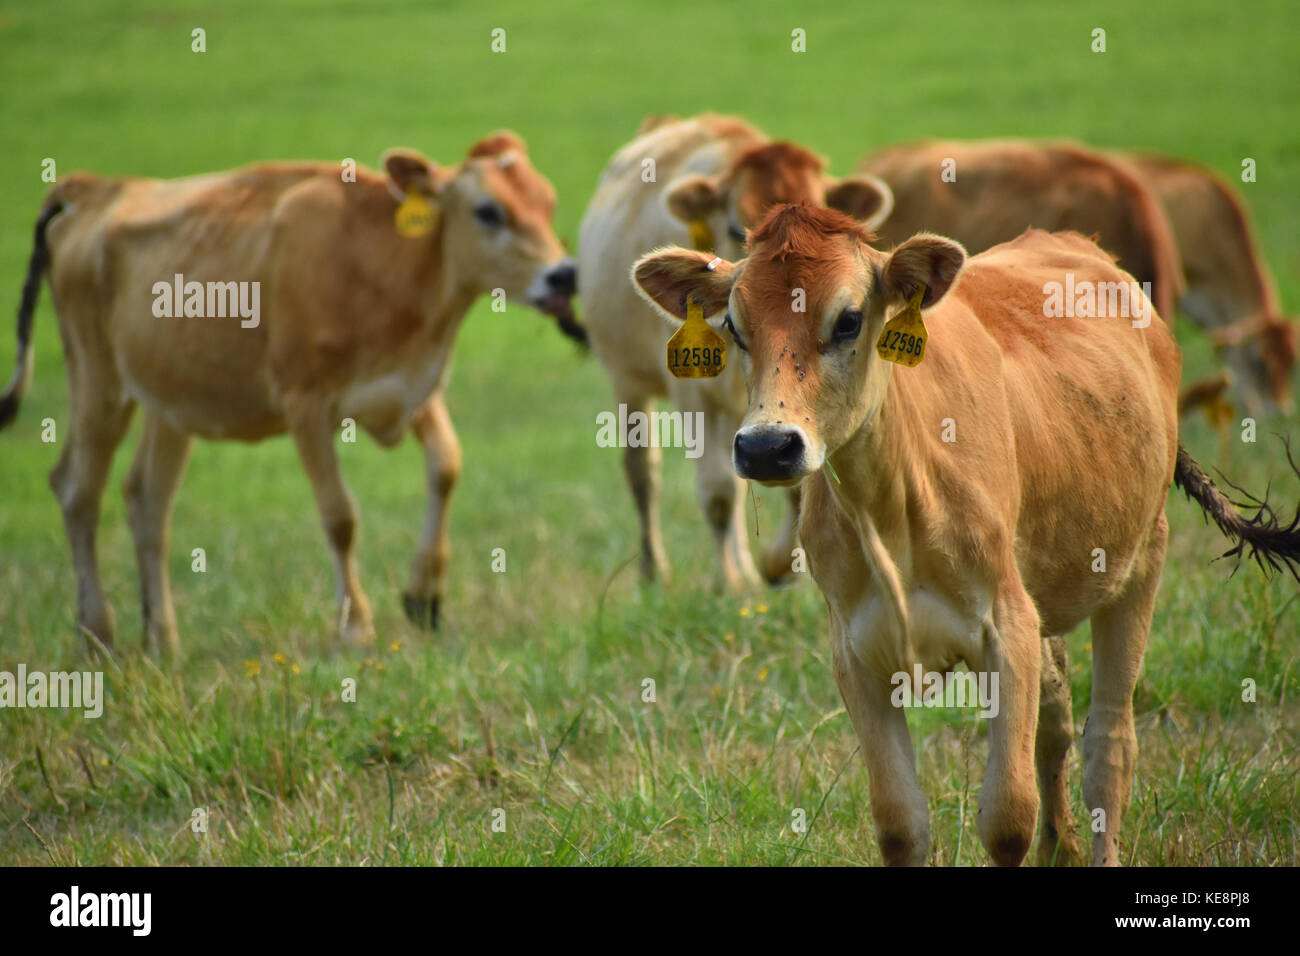 Cows in a field with beautiful green grass.  The cows have identification tags in their ears.  Some of the cows are grazing on the green grass. Stock Photo